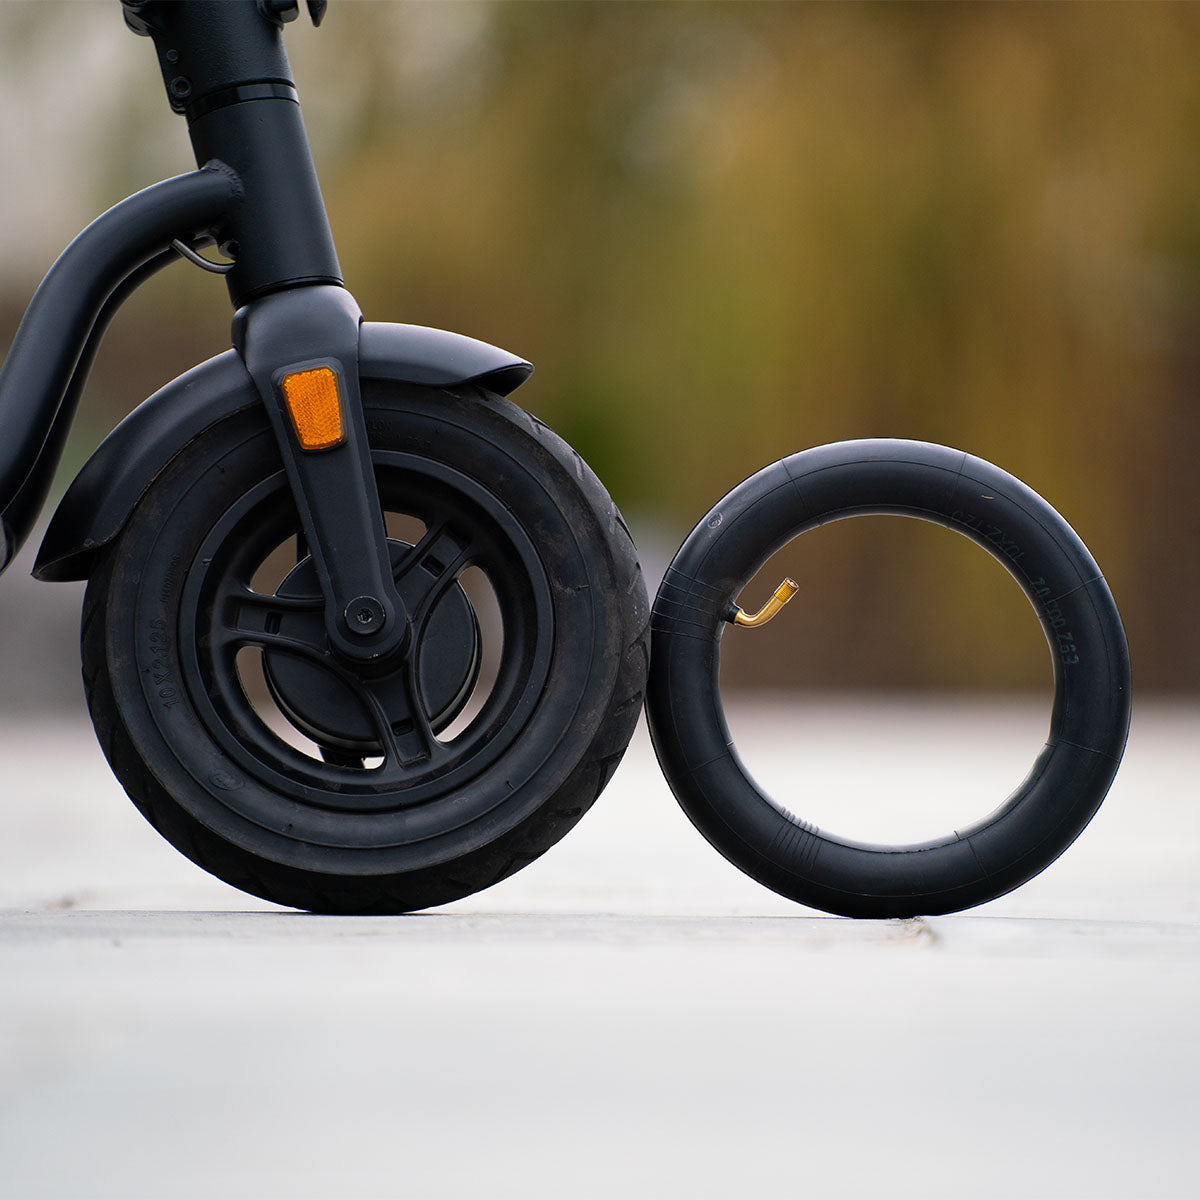 Official replacement inner tube for front or rear wheel of the Pure Air and Pure Air Pro Electric Scooter.   